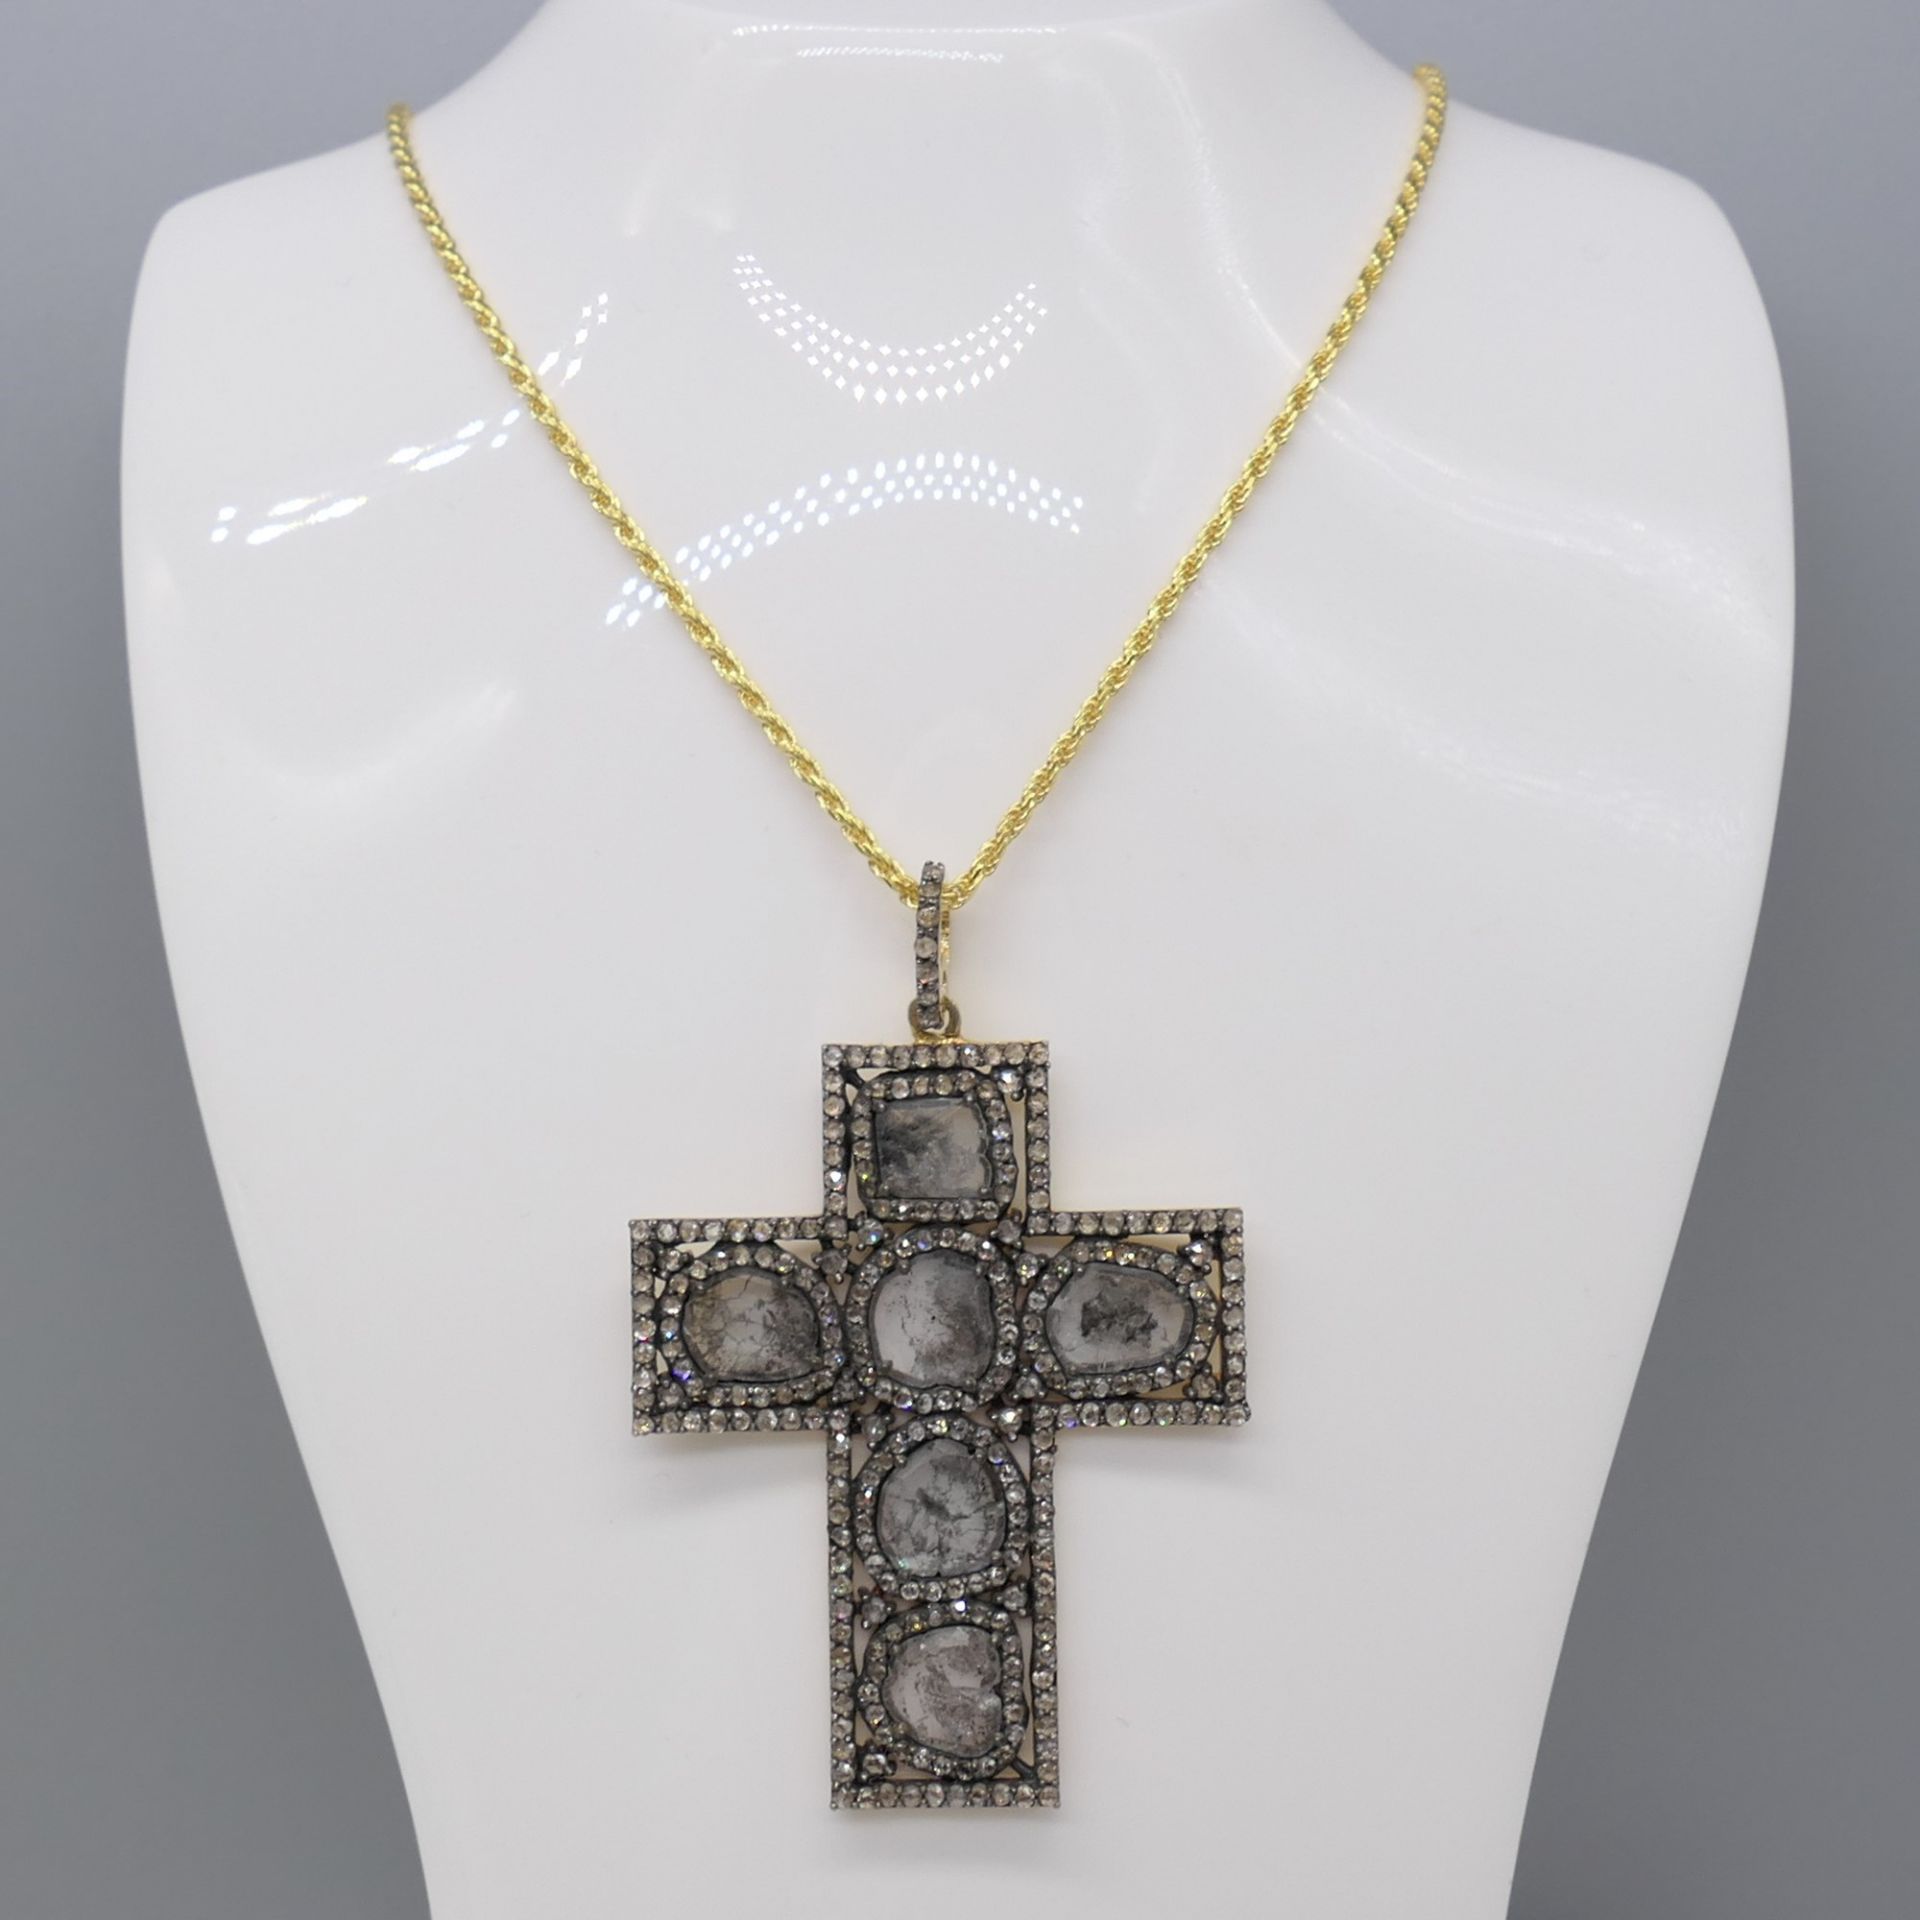 One-Off 3.80 Carat Large Diamond Cross Necklace With Chain - Image 4 of 6